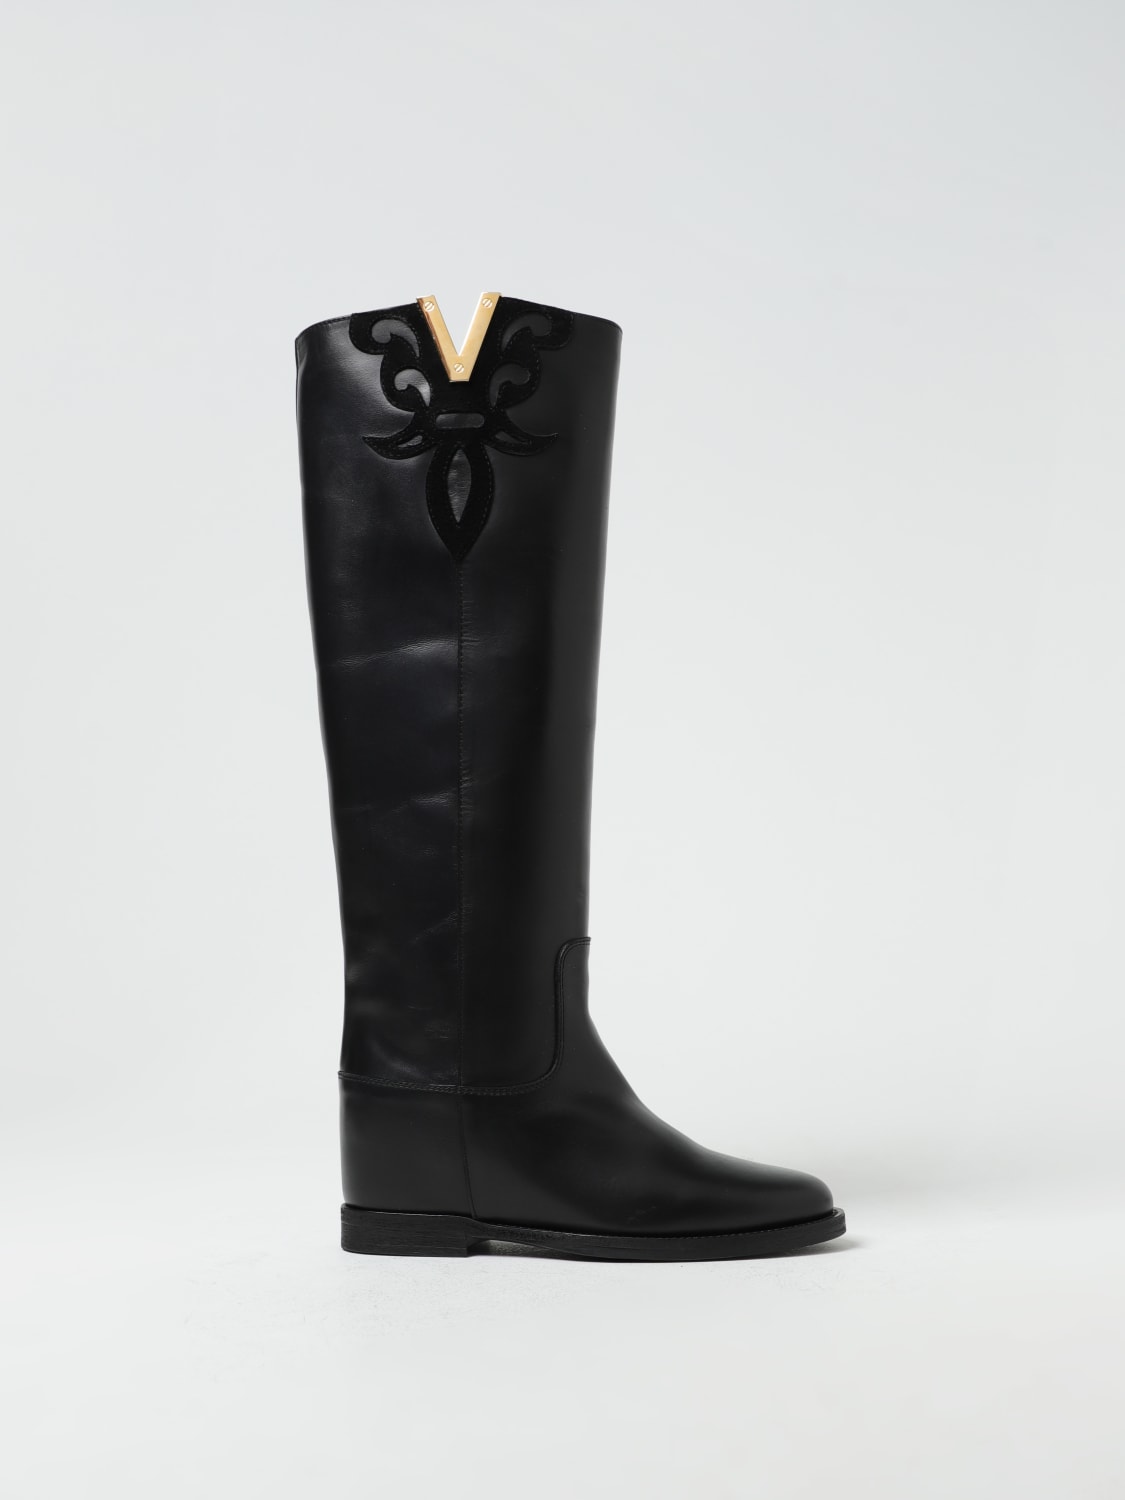 Louis Vuitton Heritage Black Leather Riding Boots